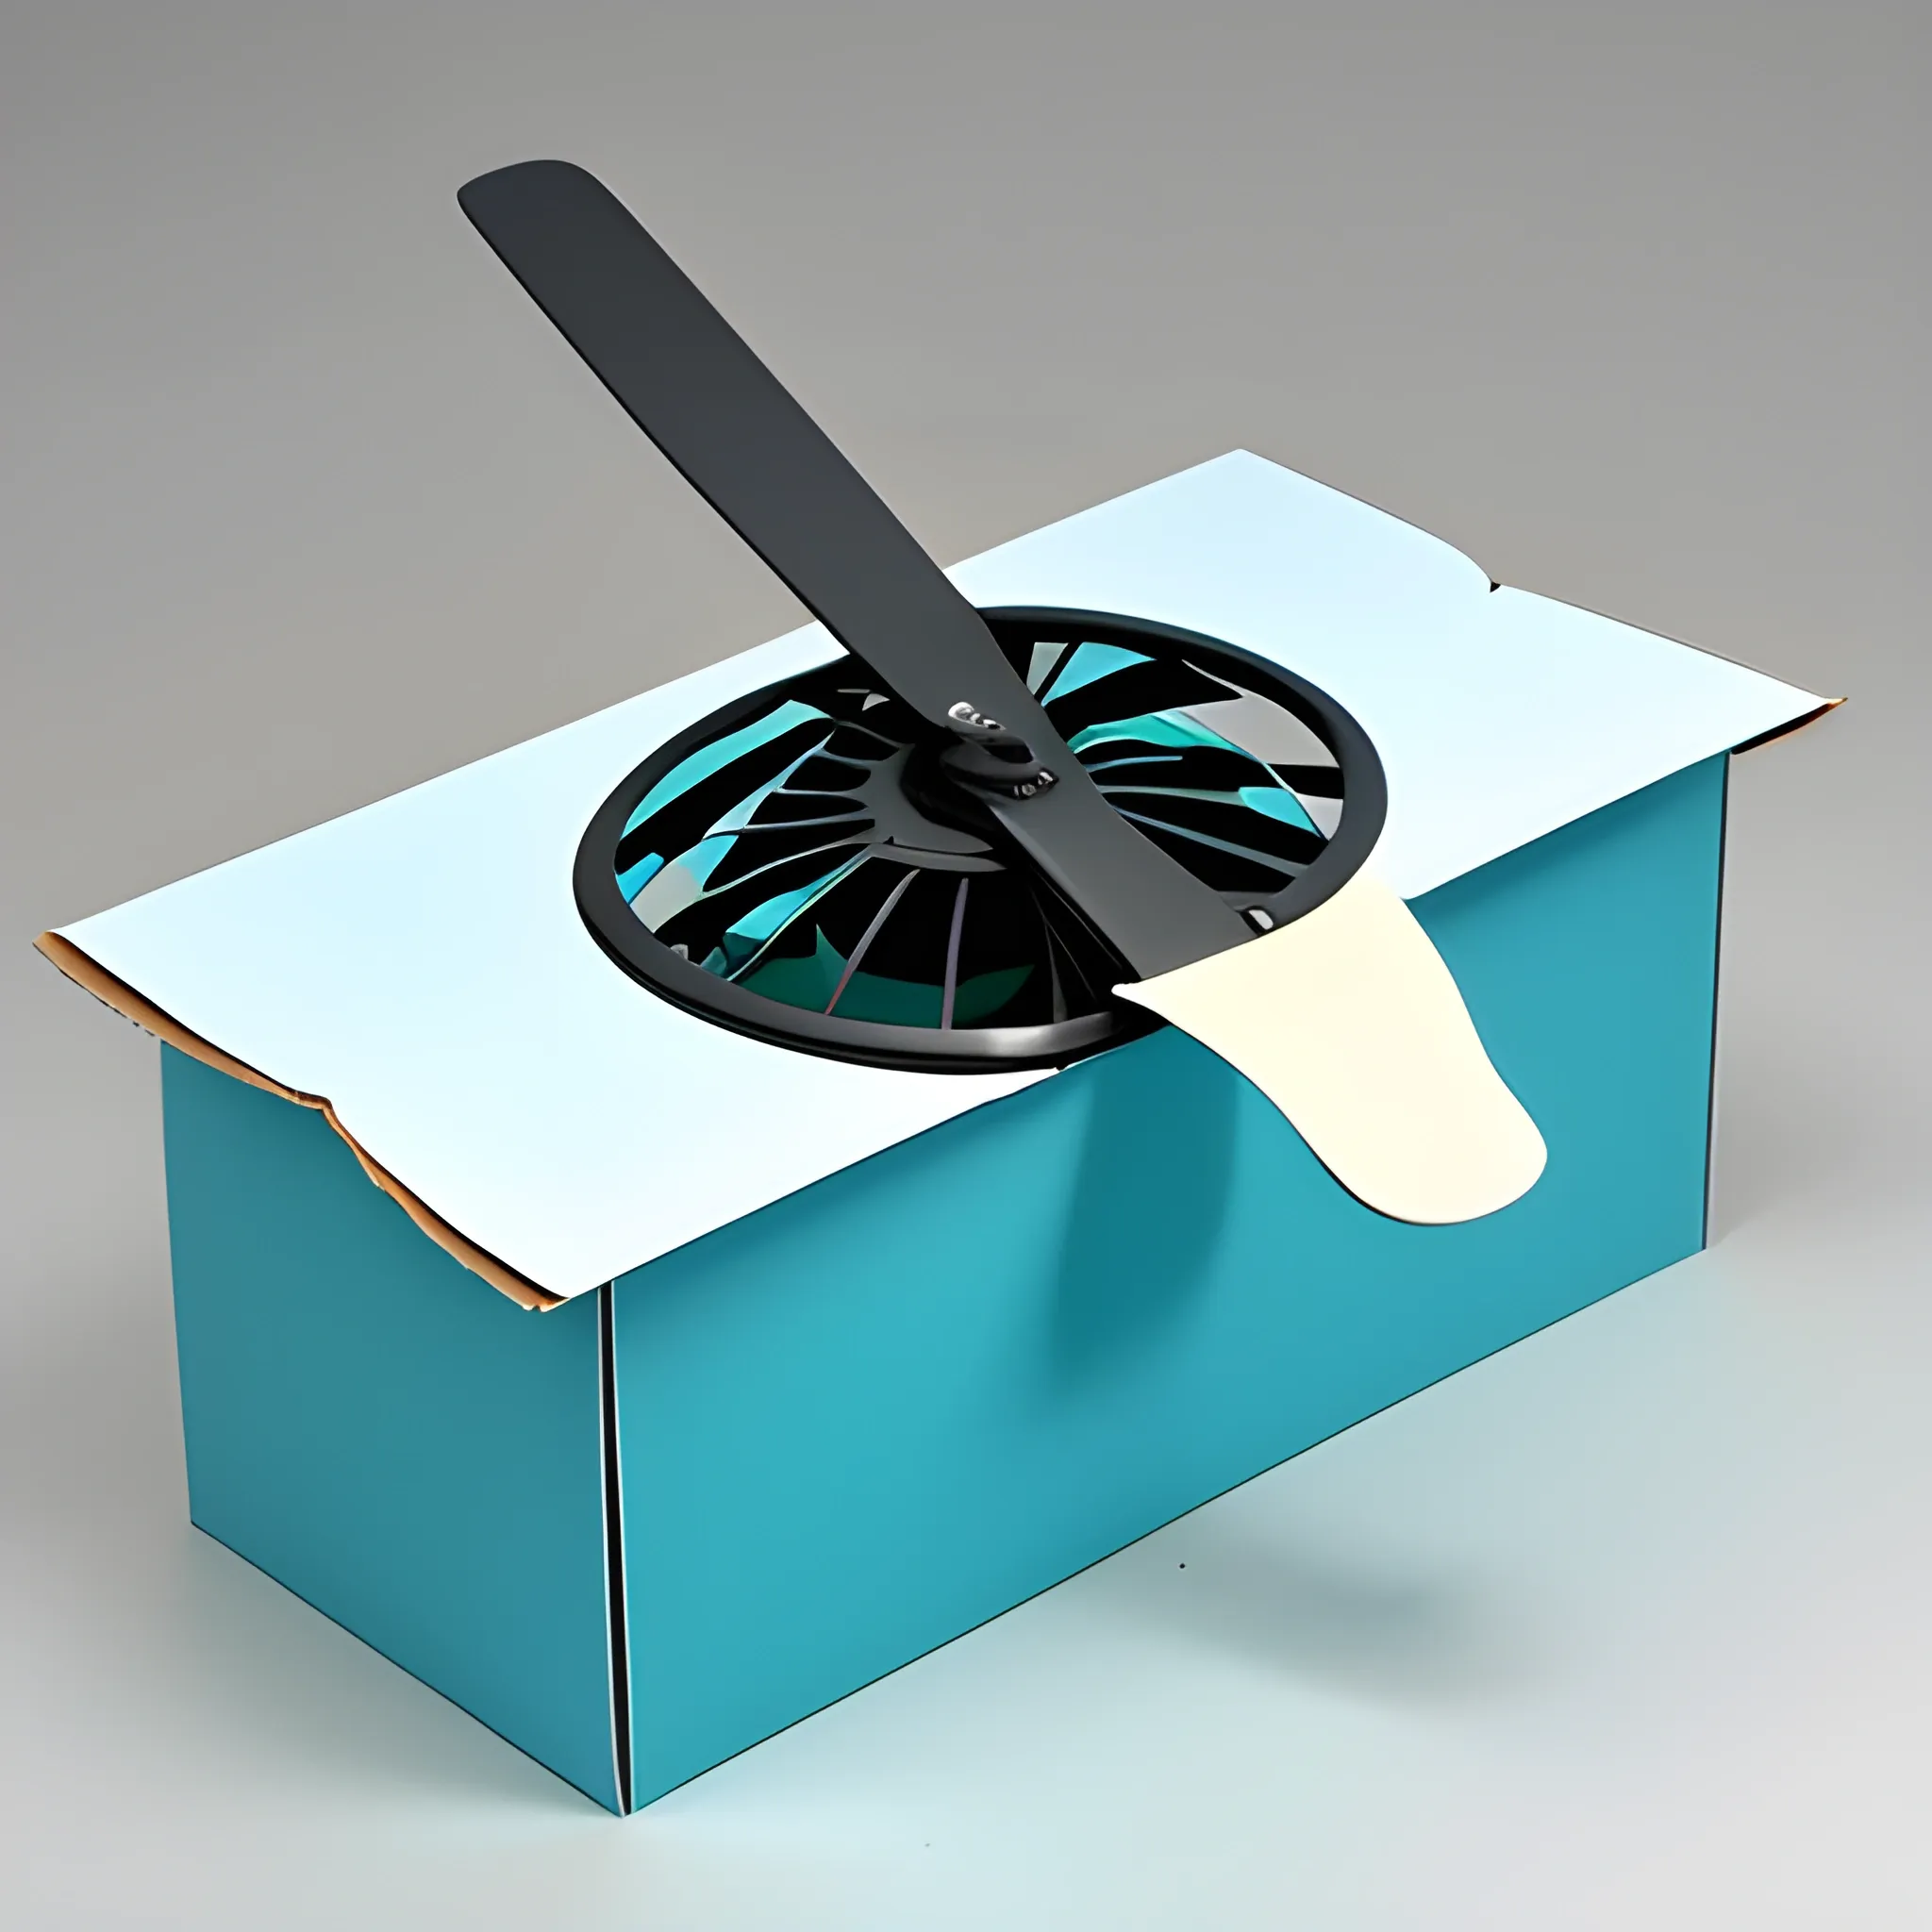 A packaging box for ceiling fan, use plain blue, green and white colors, basic.